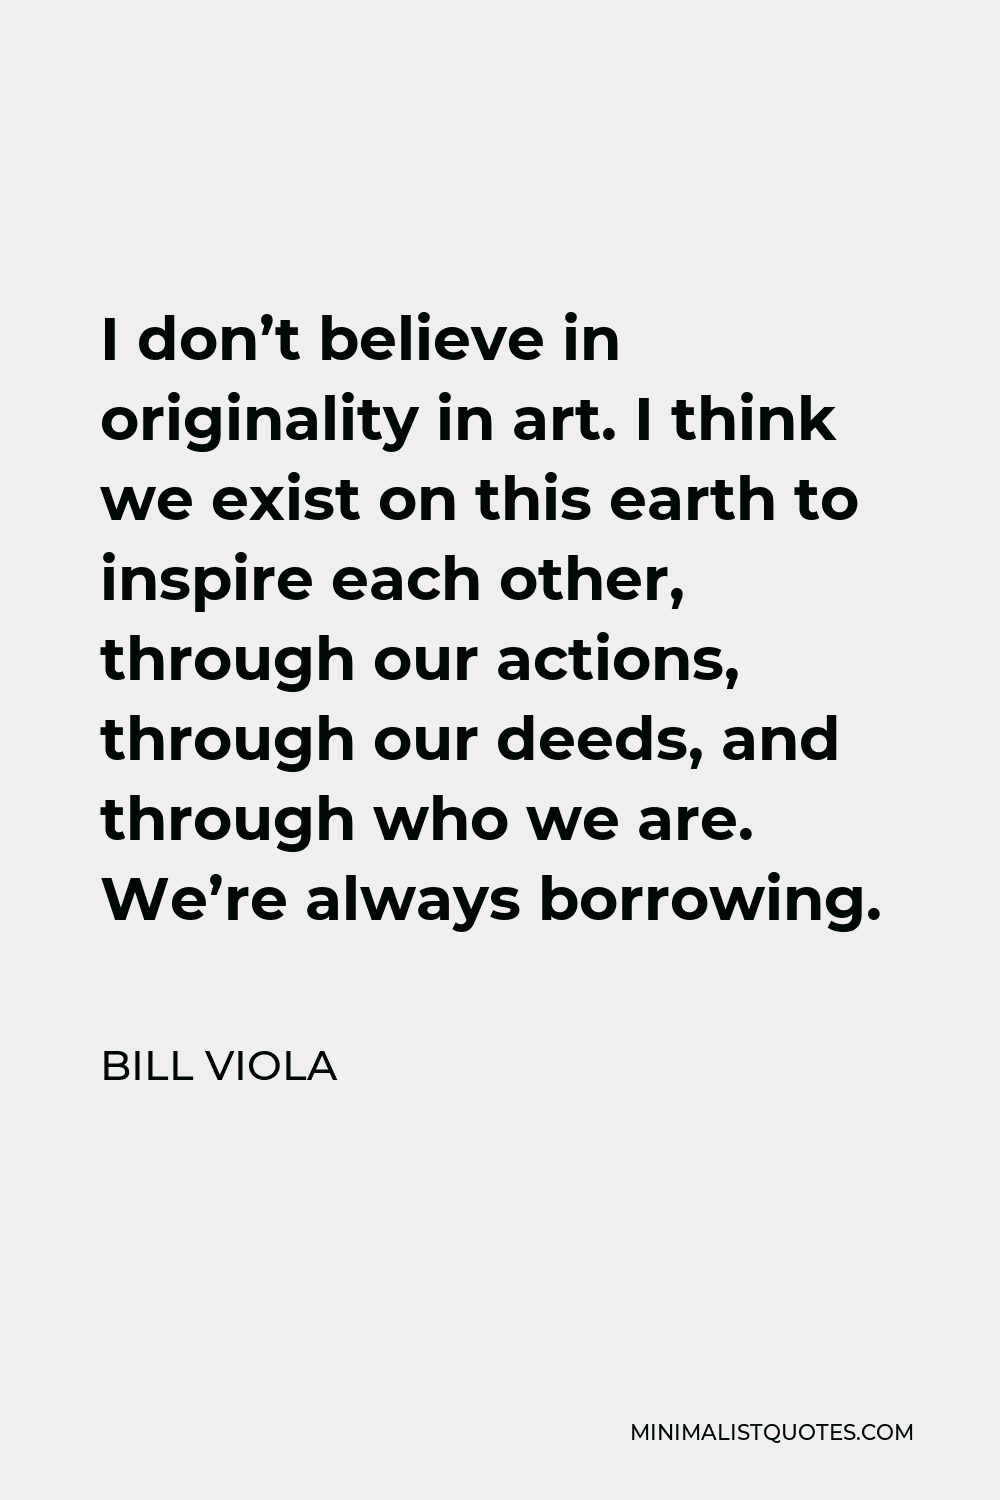 Bill Viola Quote - I don’t believe in originality in art. I think we exist on this earth to inspire each other, through our actions, through our deeds, and through who we are. We’re always borrowing.